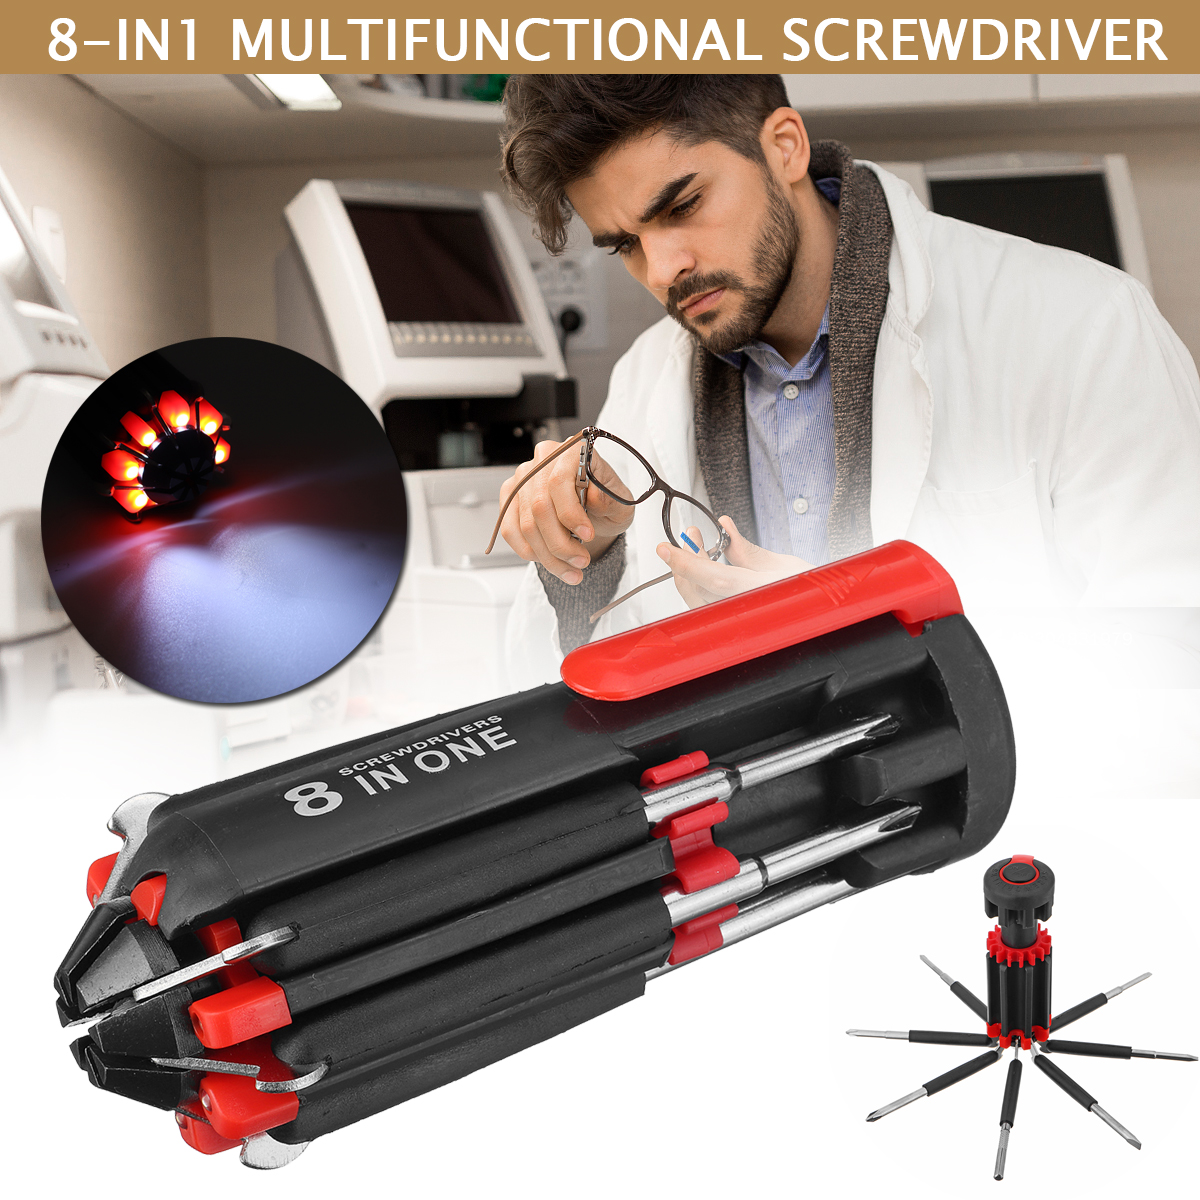 8-in-1-Multifunctional-Screwdriver-Cellphones-Watches-Home-Appliances-Repair-Tools-with-Light-1667233-1